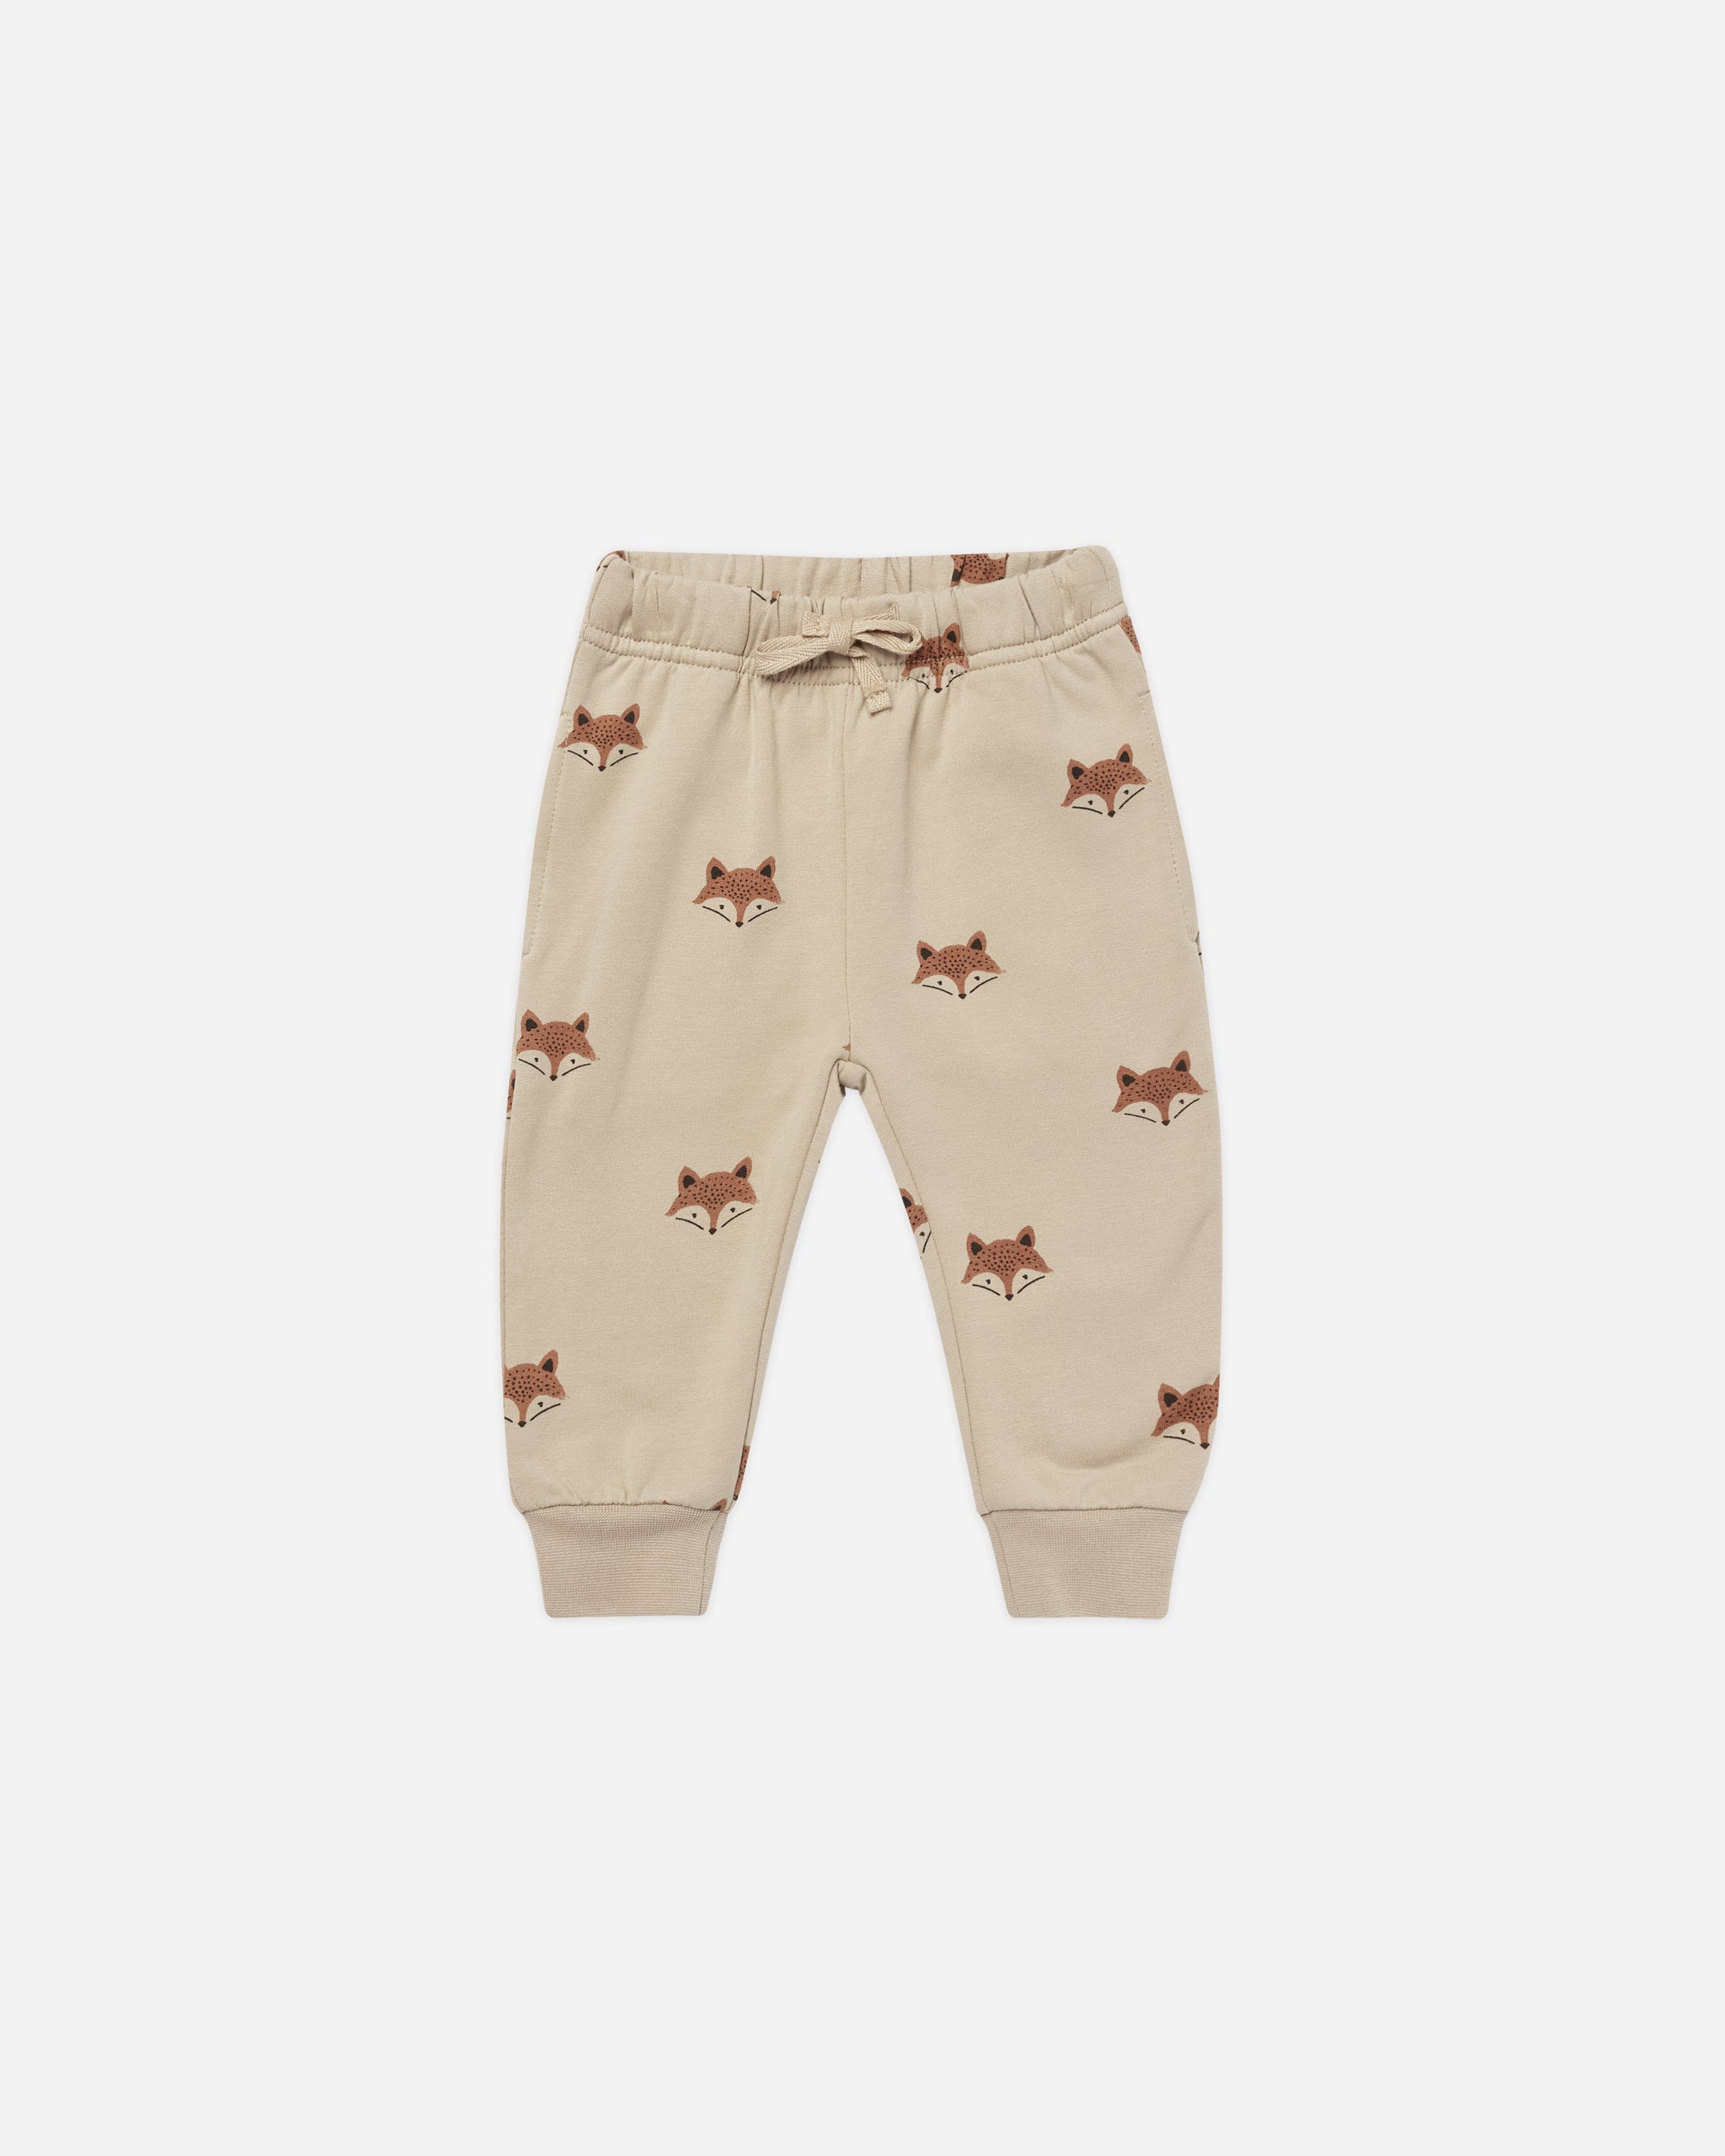 Relaxed Fleece Sweatpant || Foxes - Rylee + Cru | Kids Clothes | Trendy Baby Clothes | Modern Infant Outfits |